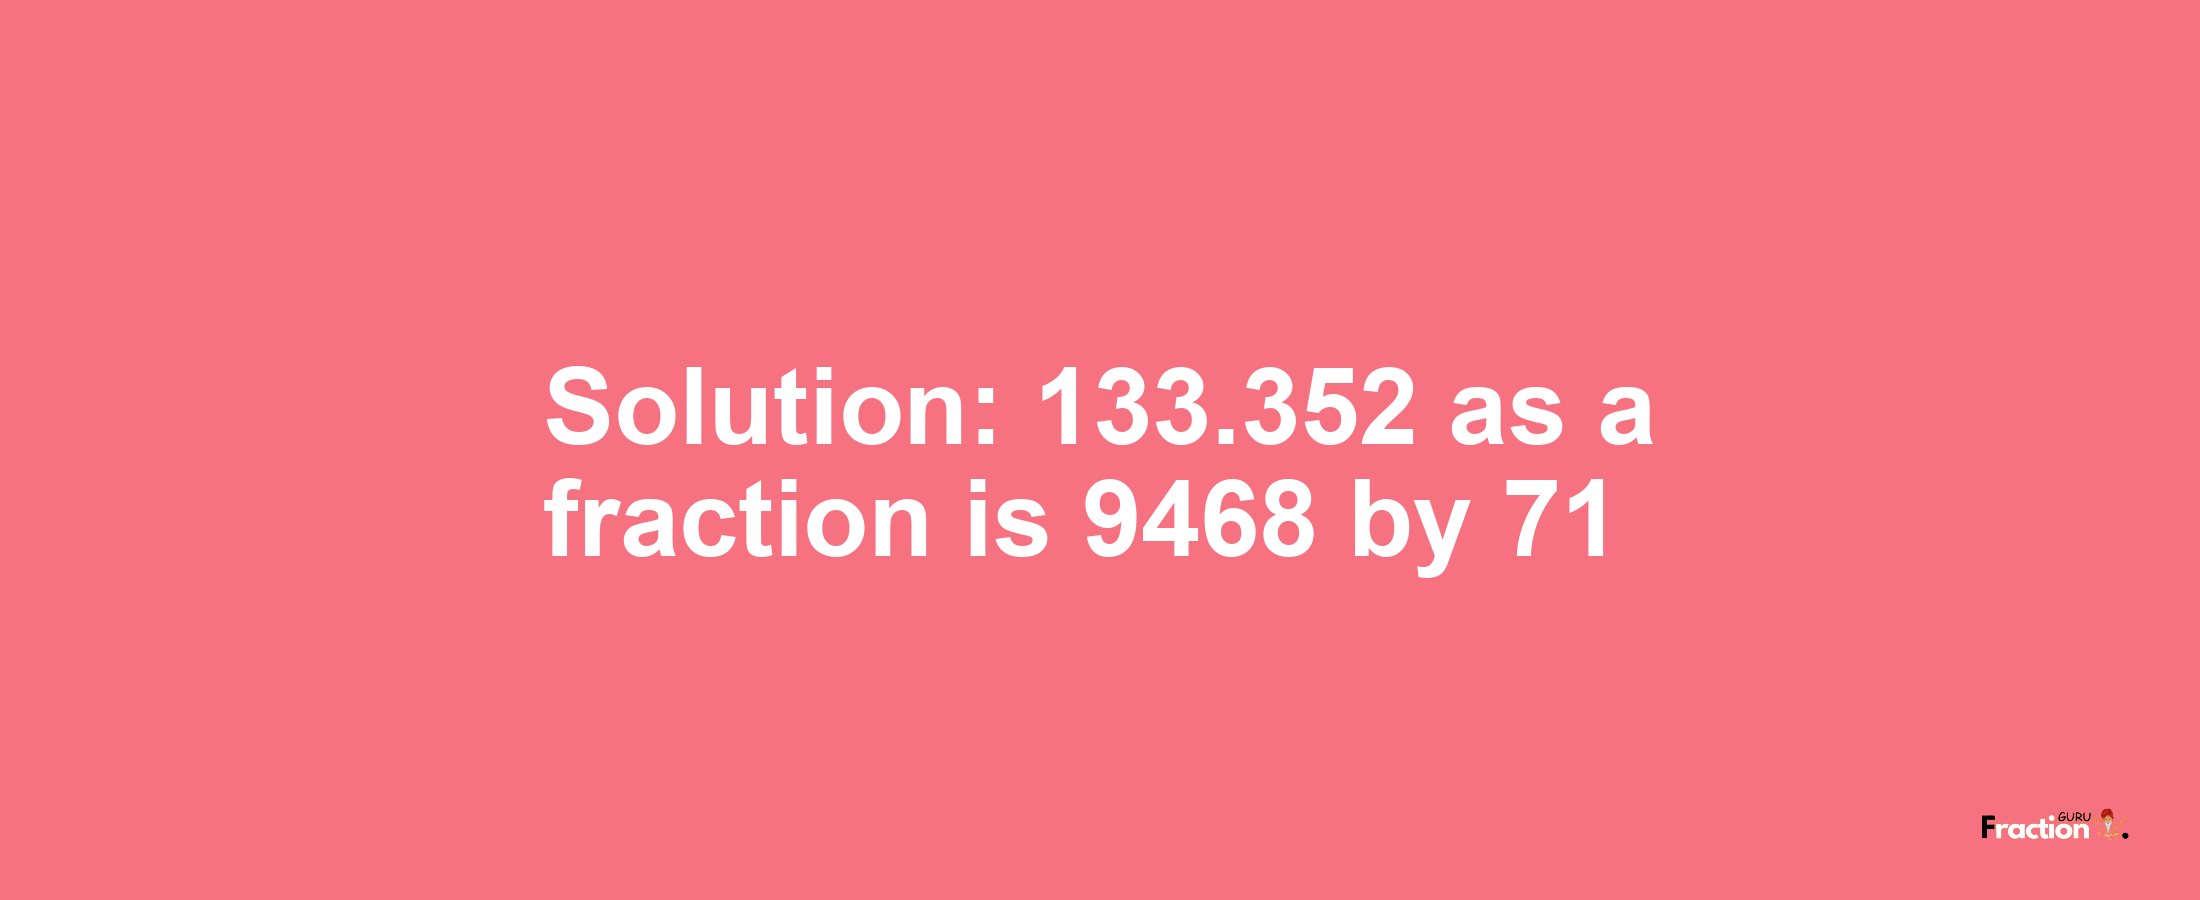 Solution:133.352 as a fraction is 9468/71